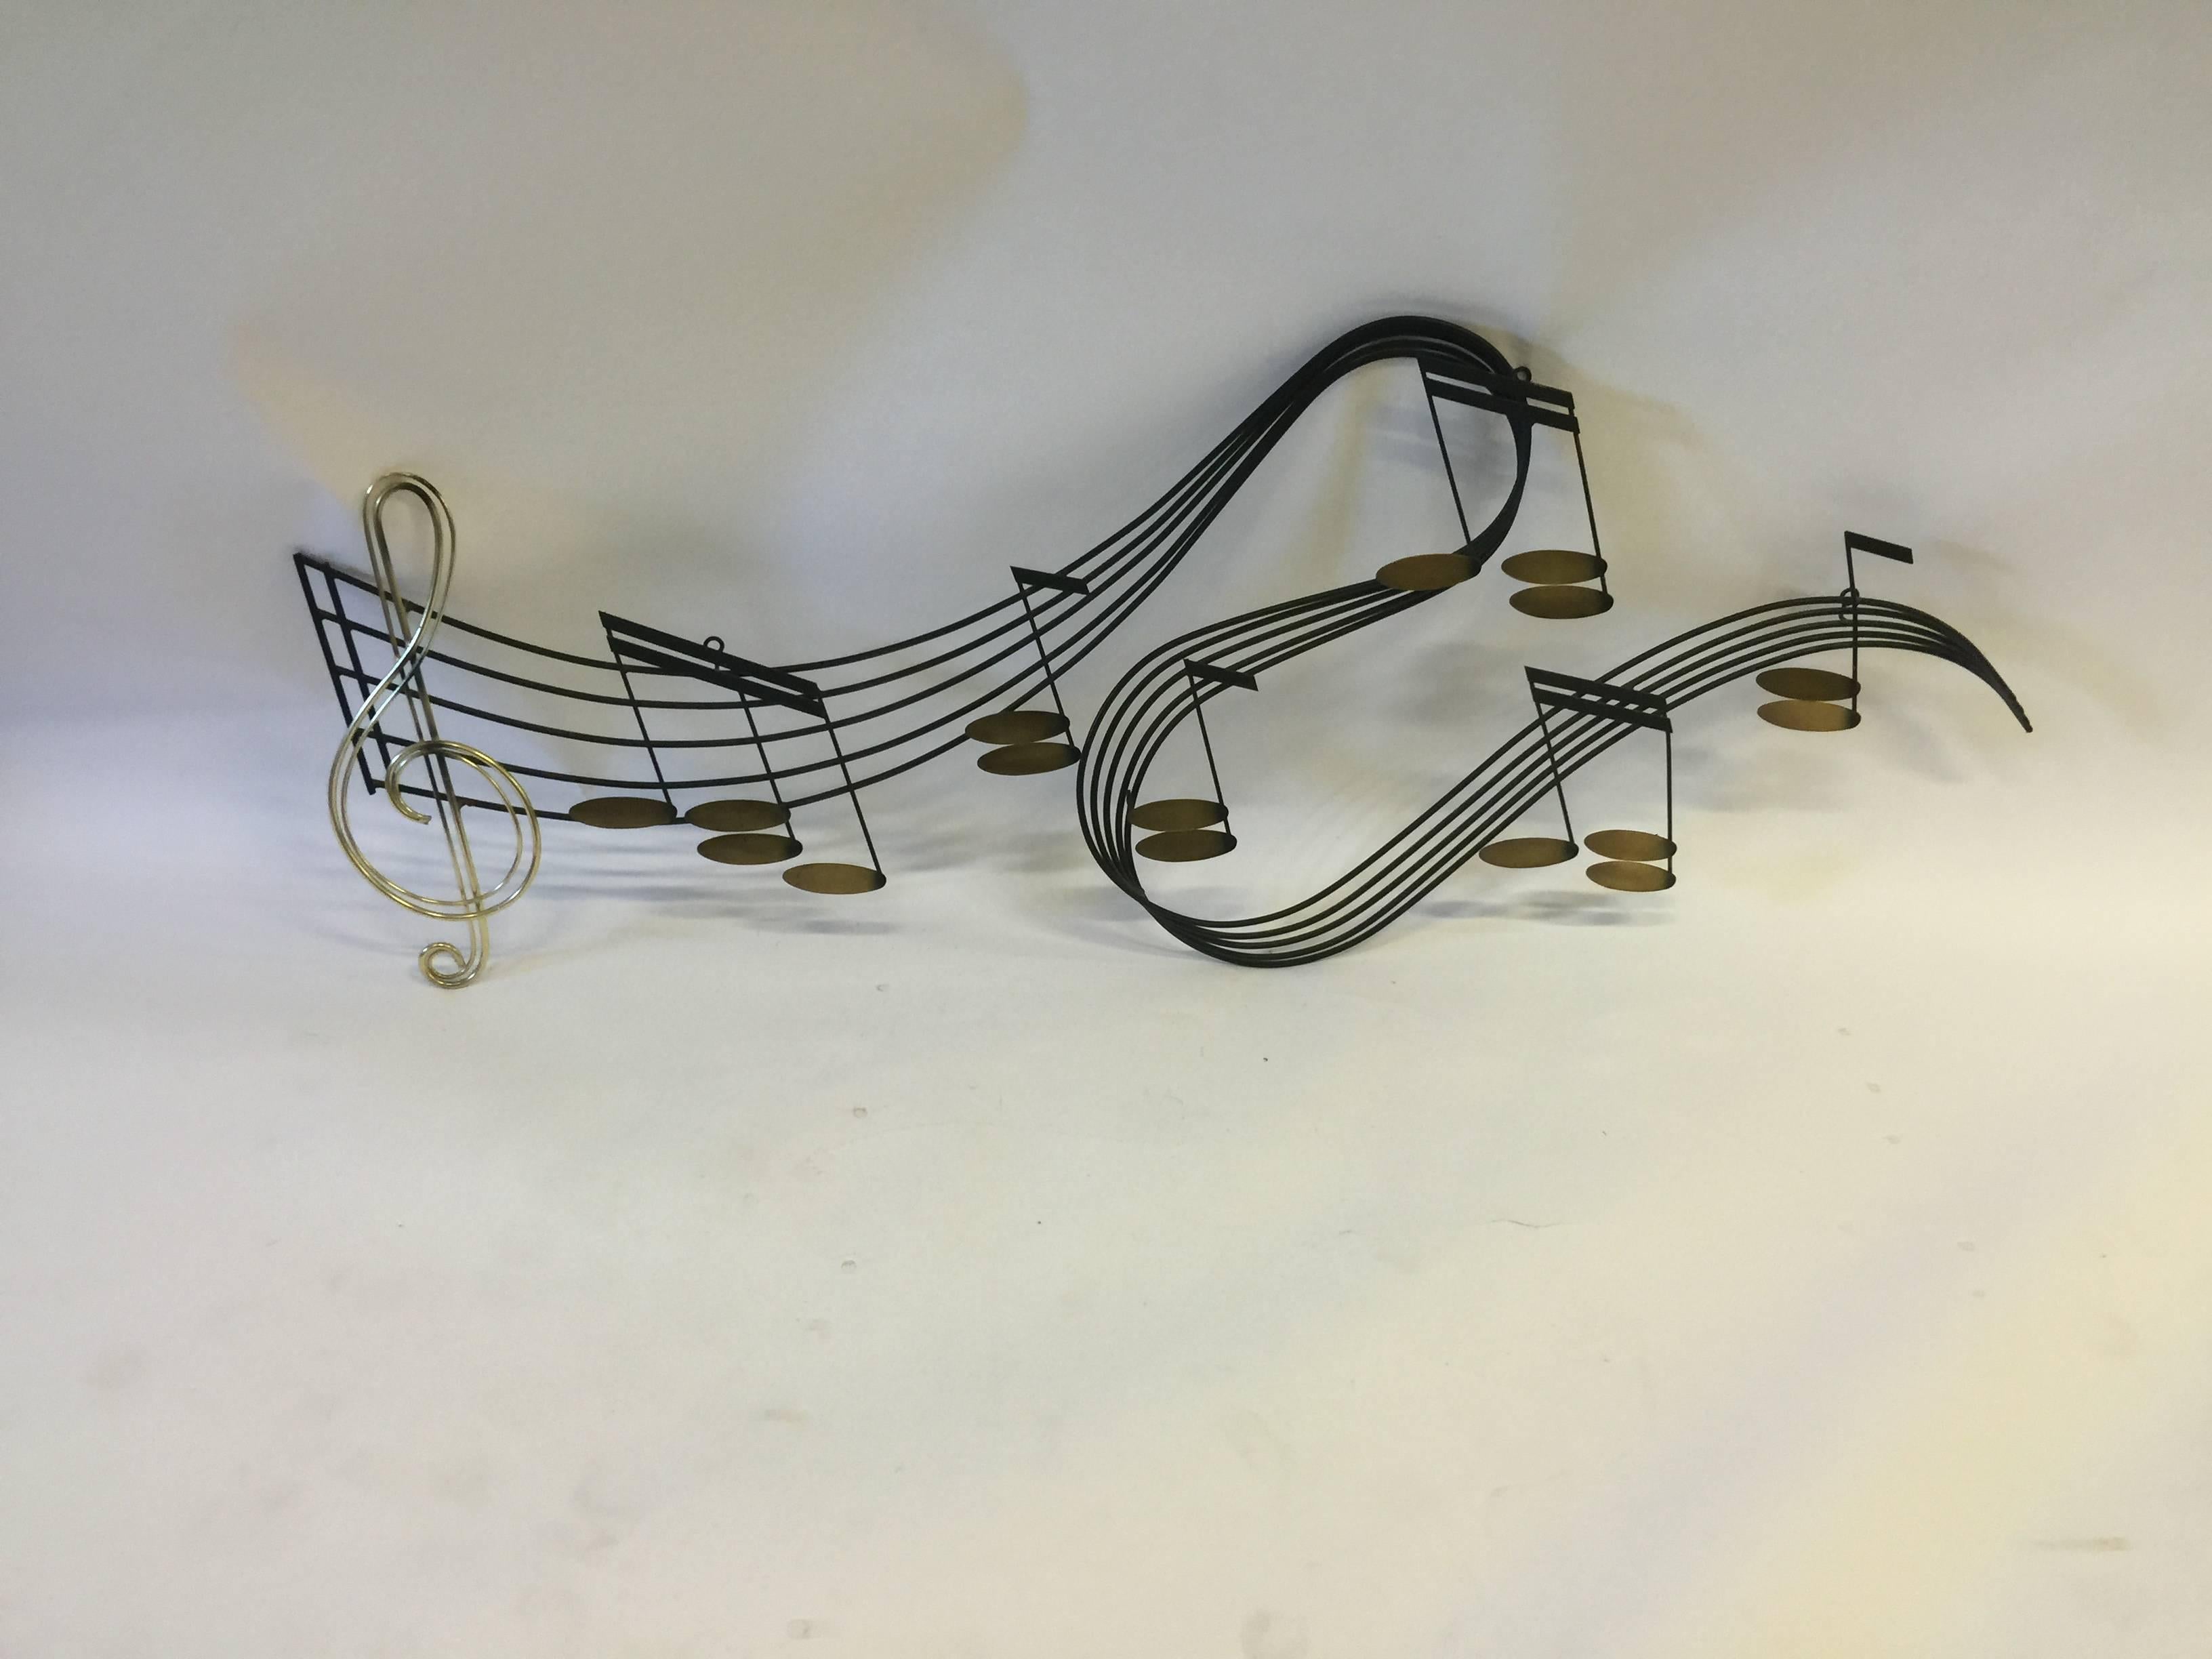 Black enameled and polished brass musical score wall sculpture by Curtis Jere,
circa 1970s. A nice flowing wall hanging that would playfully accent many interiors.